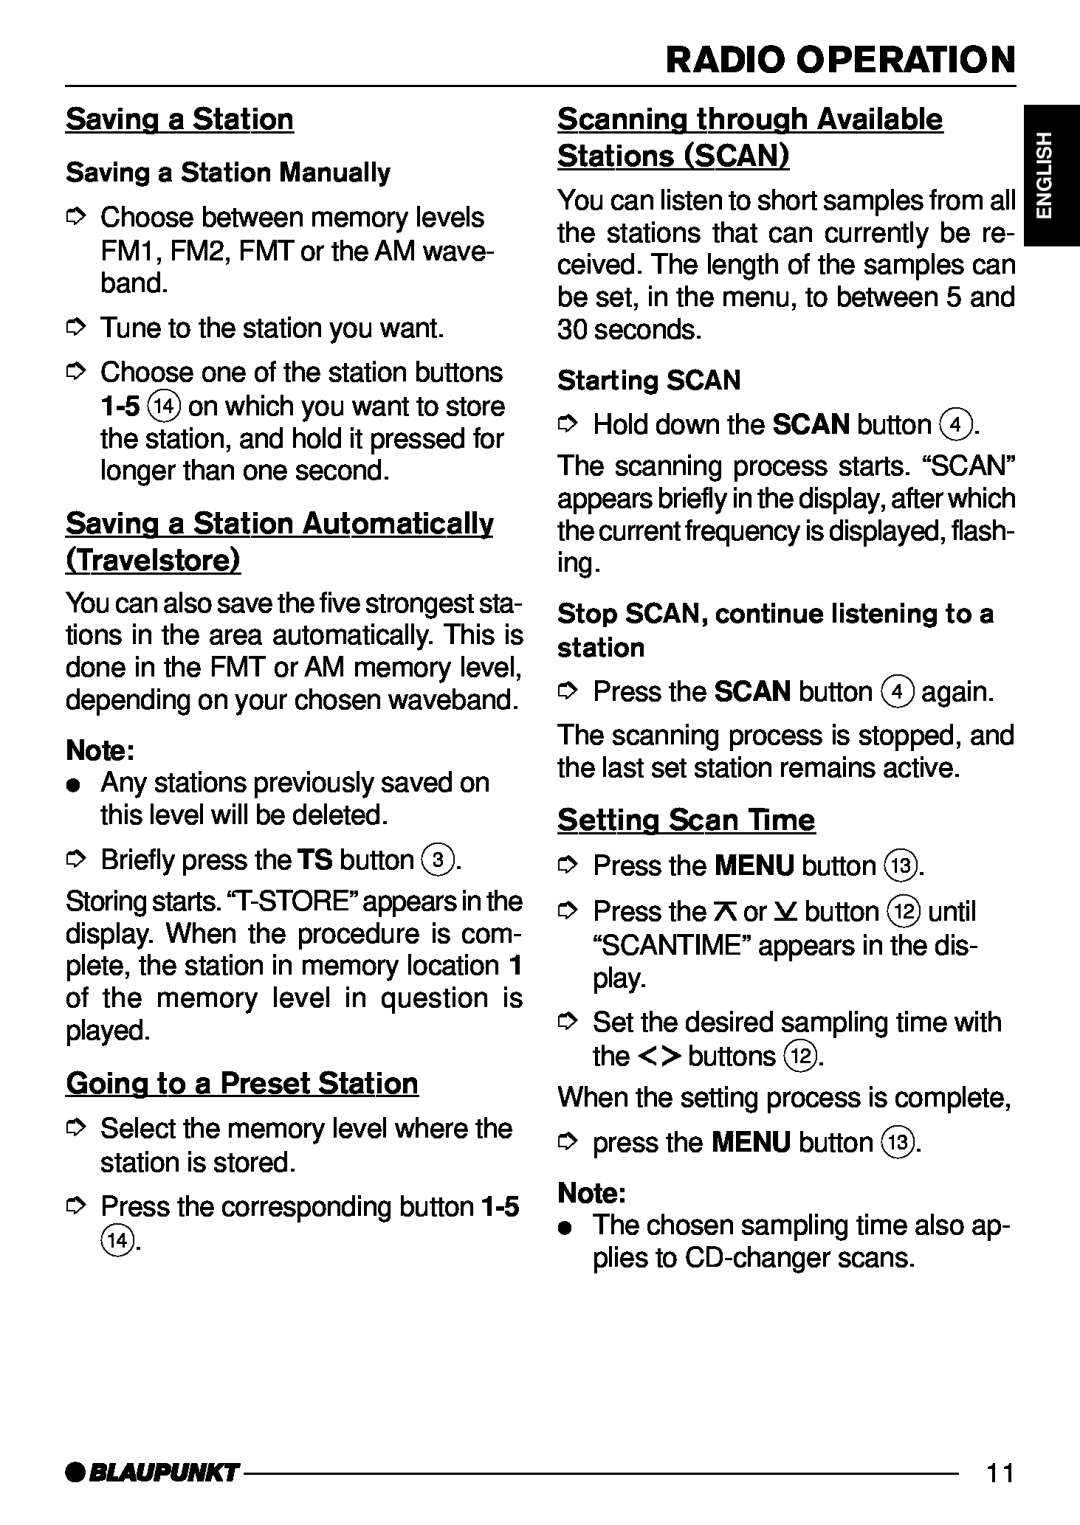 Blaupunkt C31 manual Saving a Station Automatically Travelstore, Going to a Preset Station, Scanning through Available 